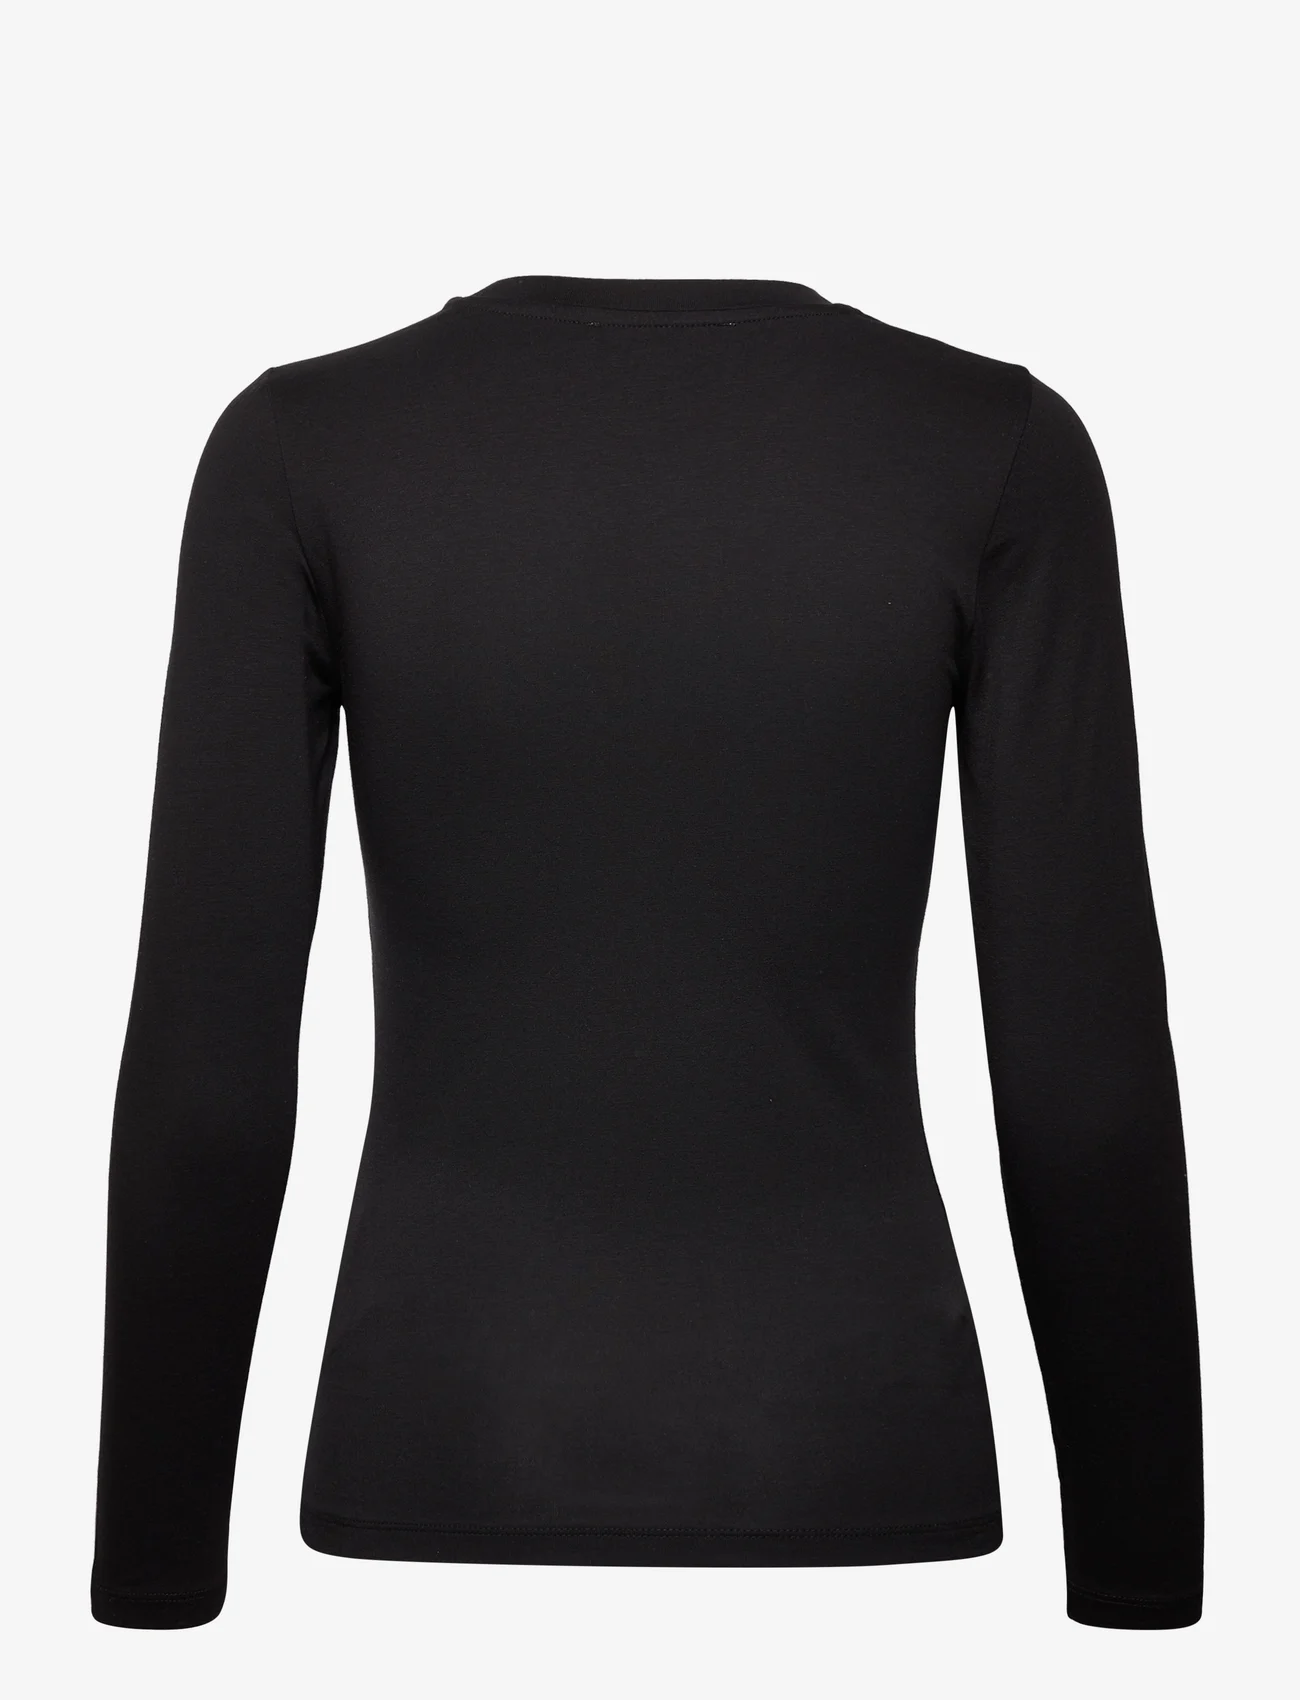 A-View - Stabil top l/s - long-sleeved tops - black - 1